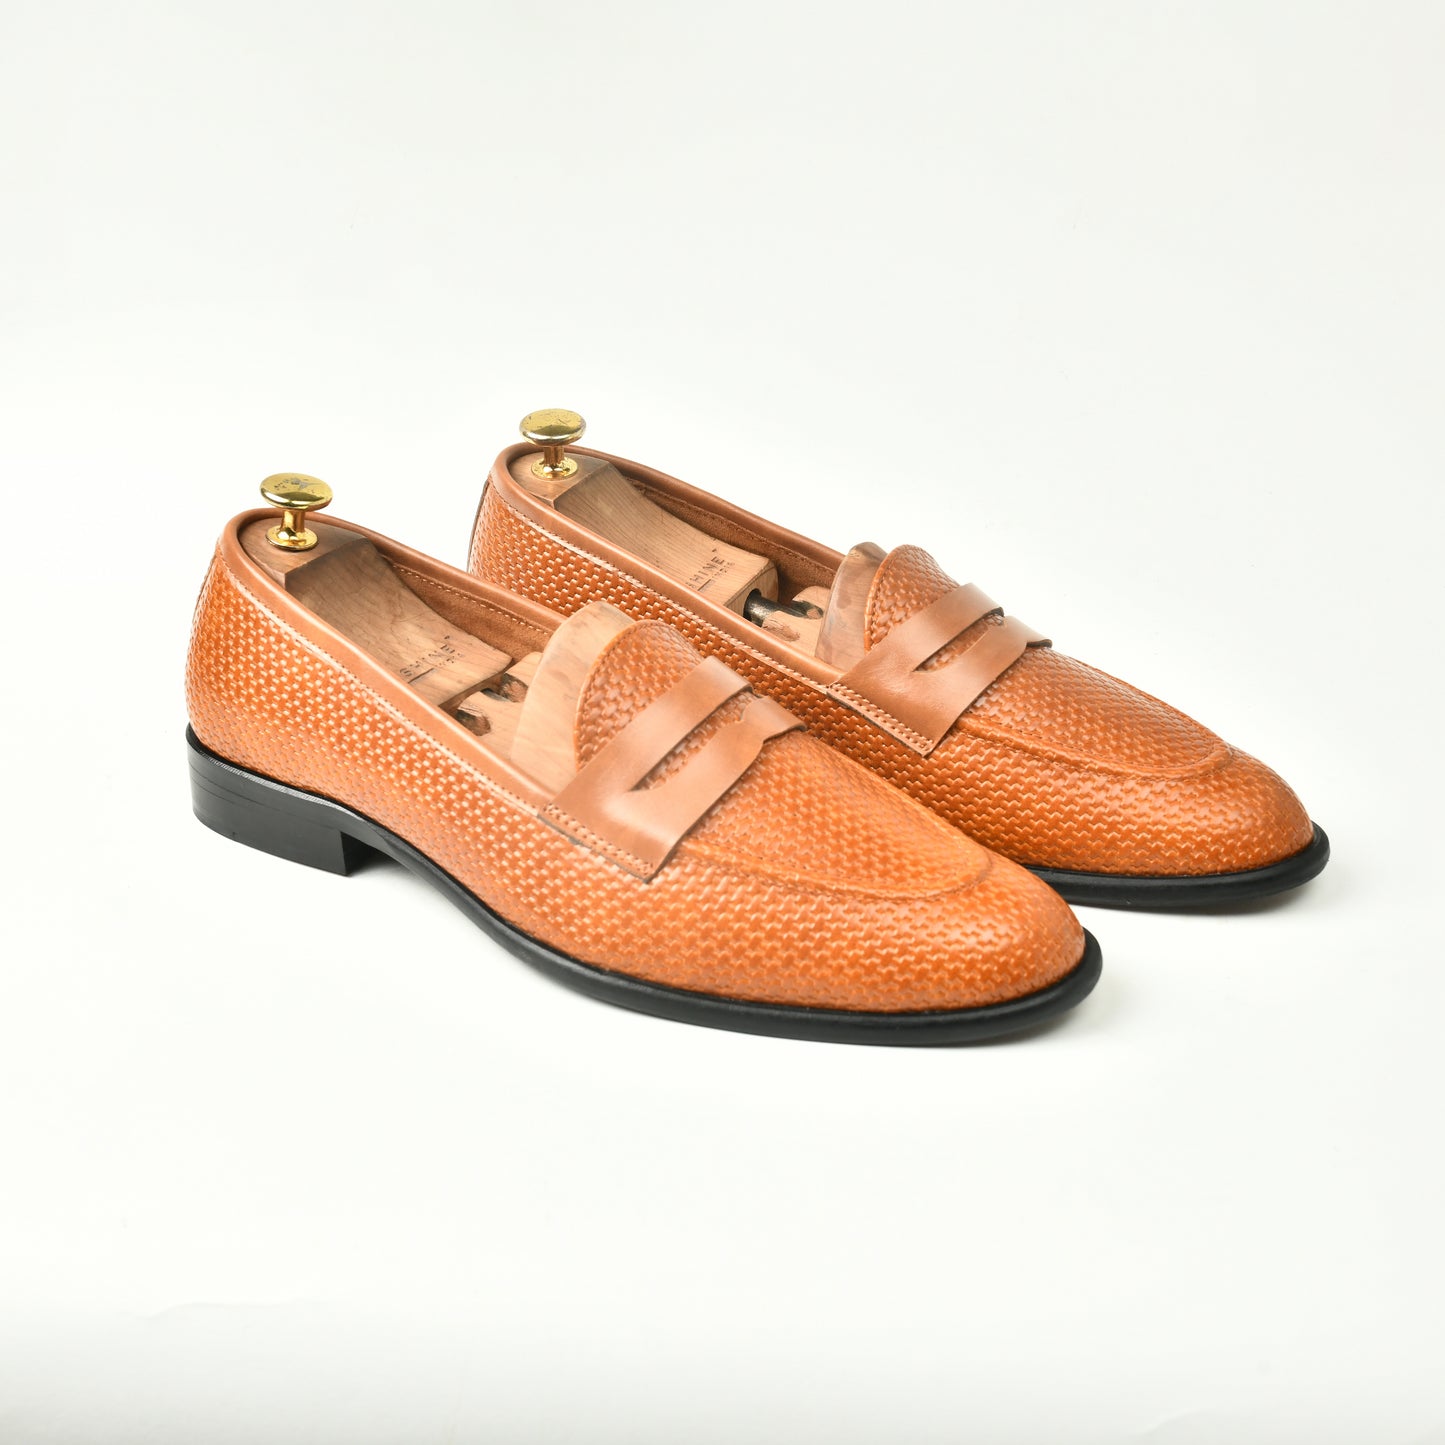 Woven Leather Slip Ons - Tan